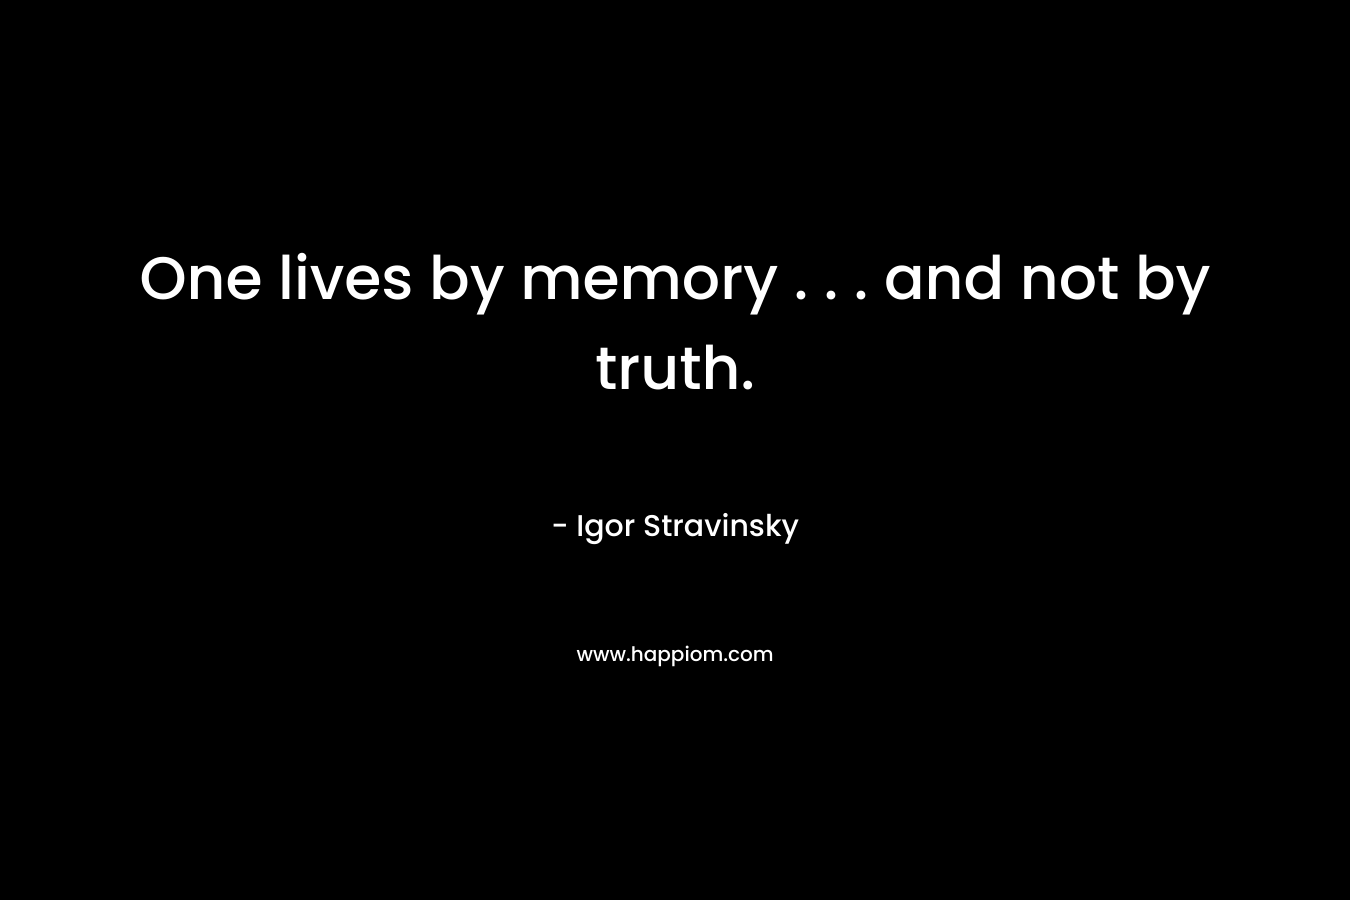 One lives by memory . . . and not by truth.